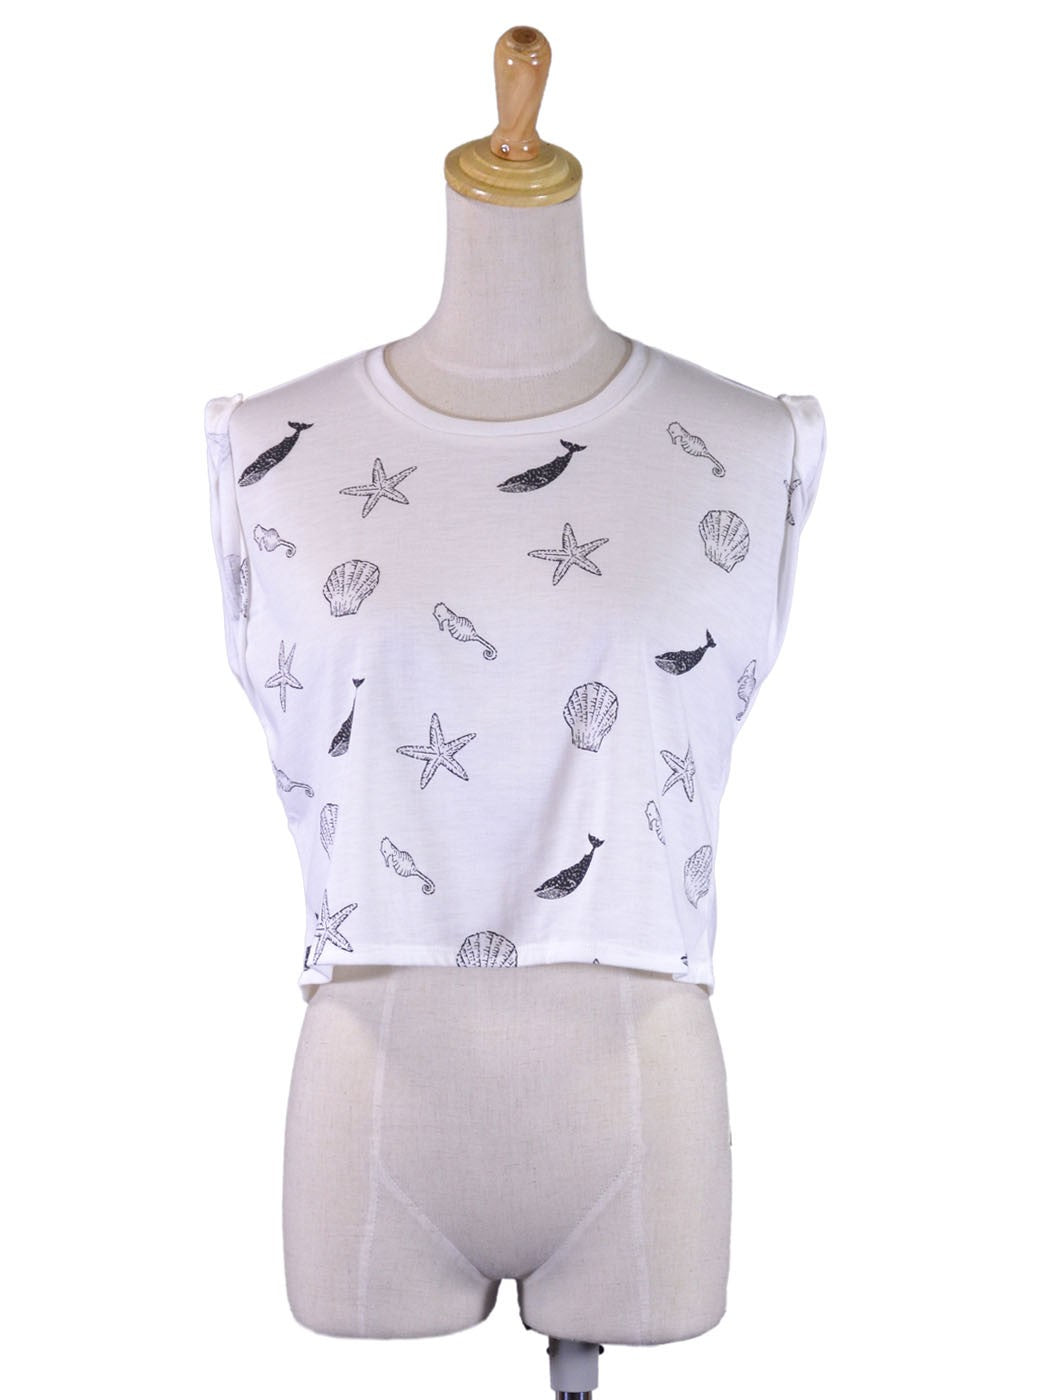 En Creme Aquatic Collection Black and White Print Muscle Shirt Cropped Tee